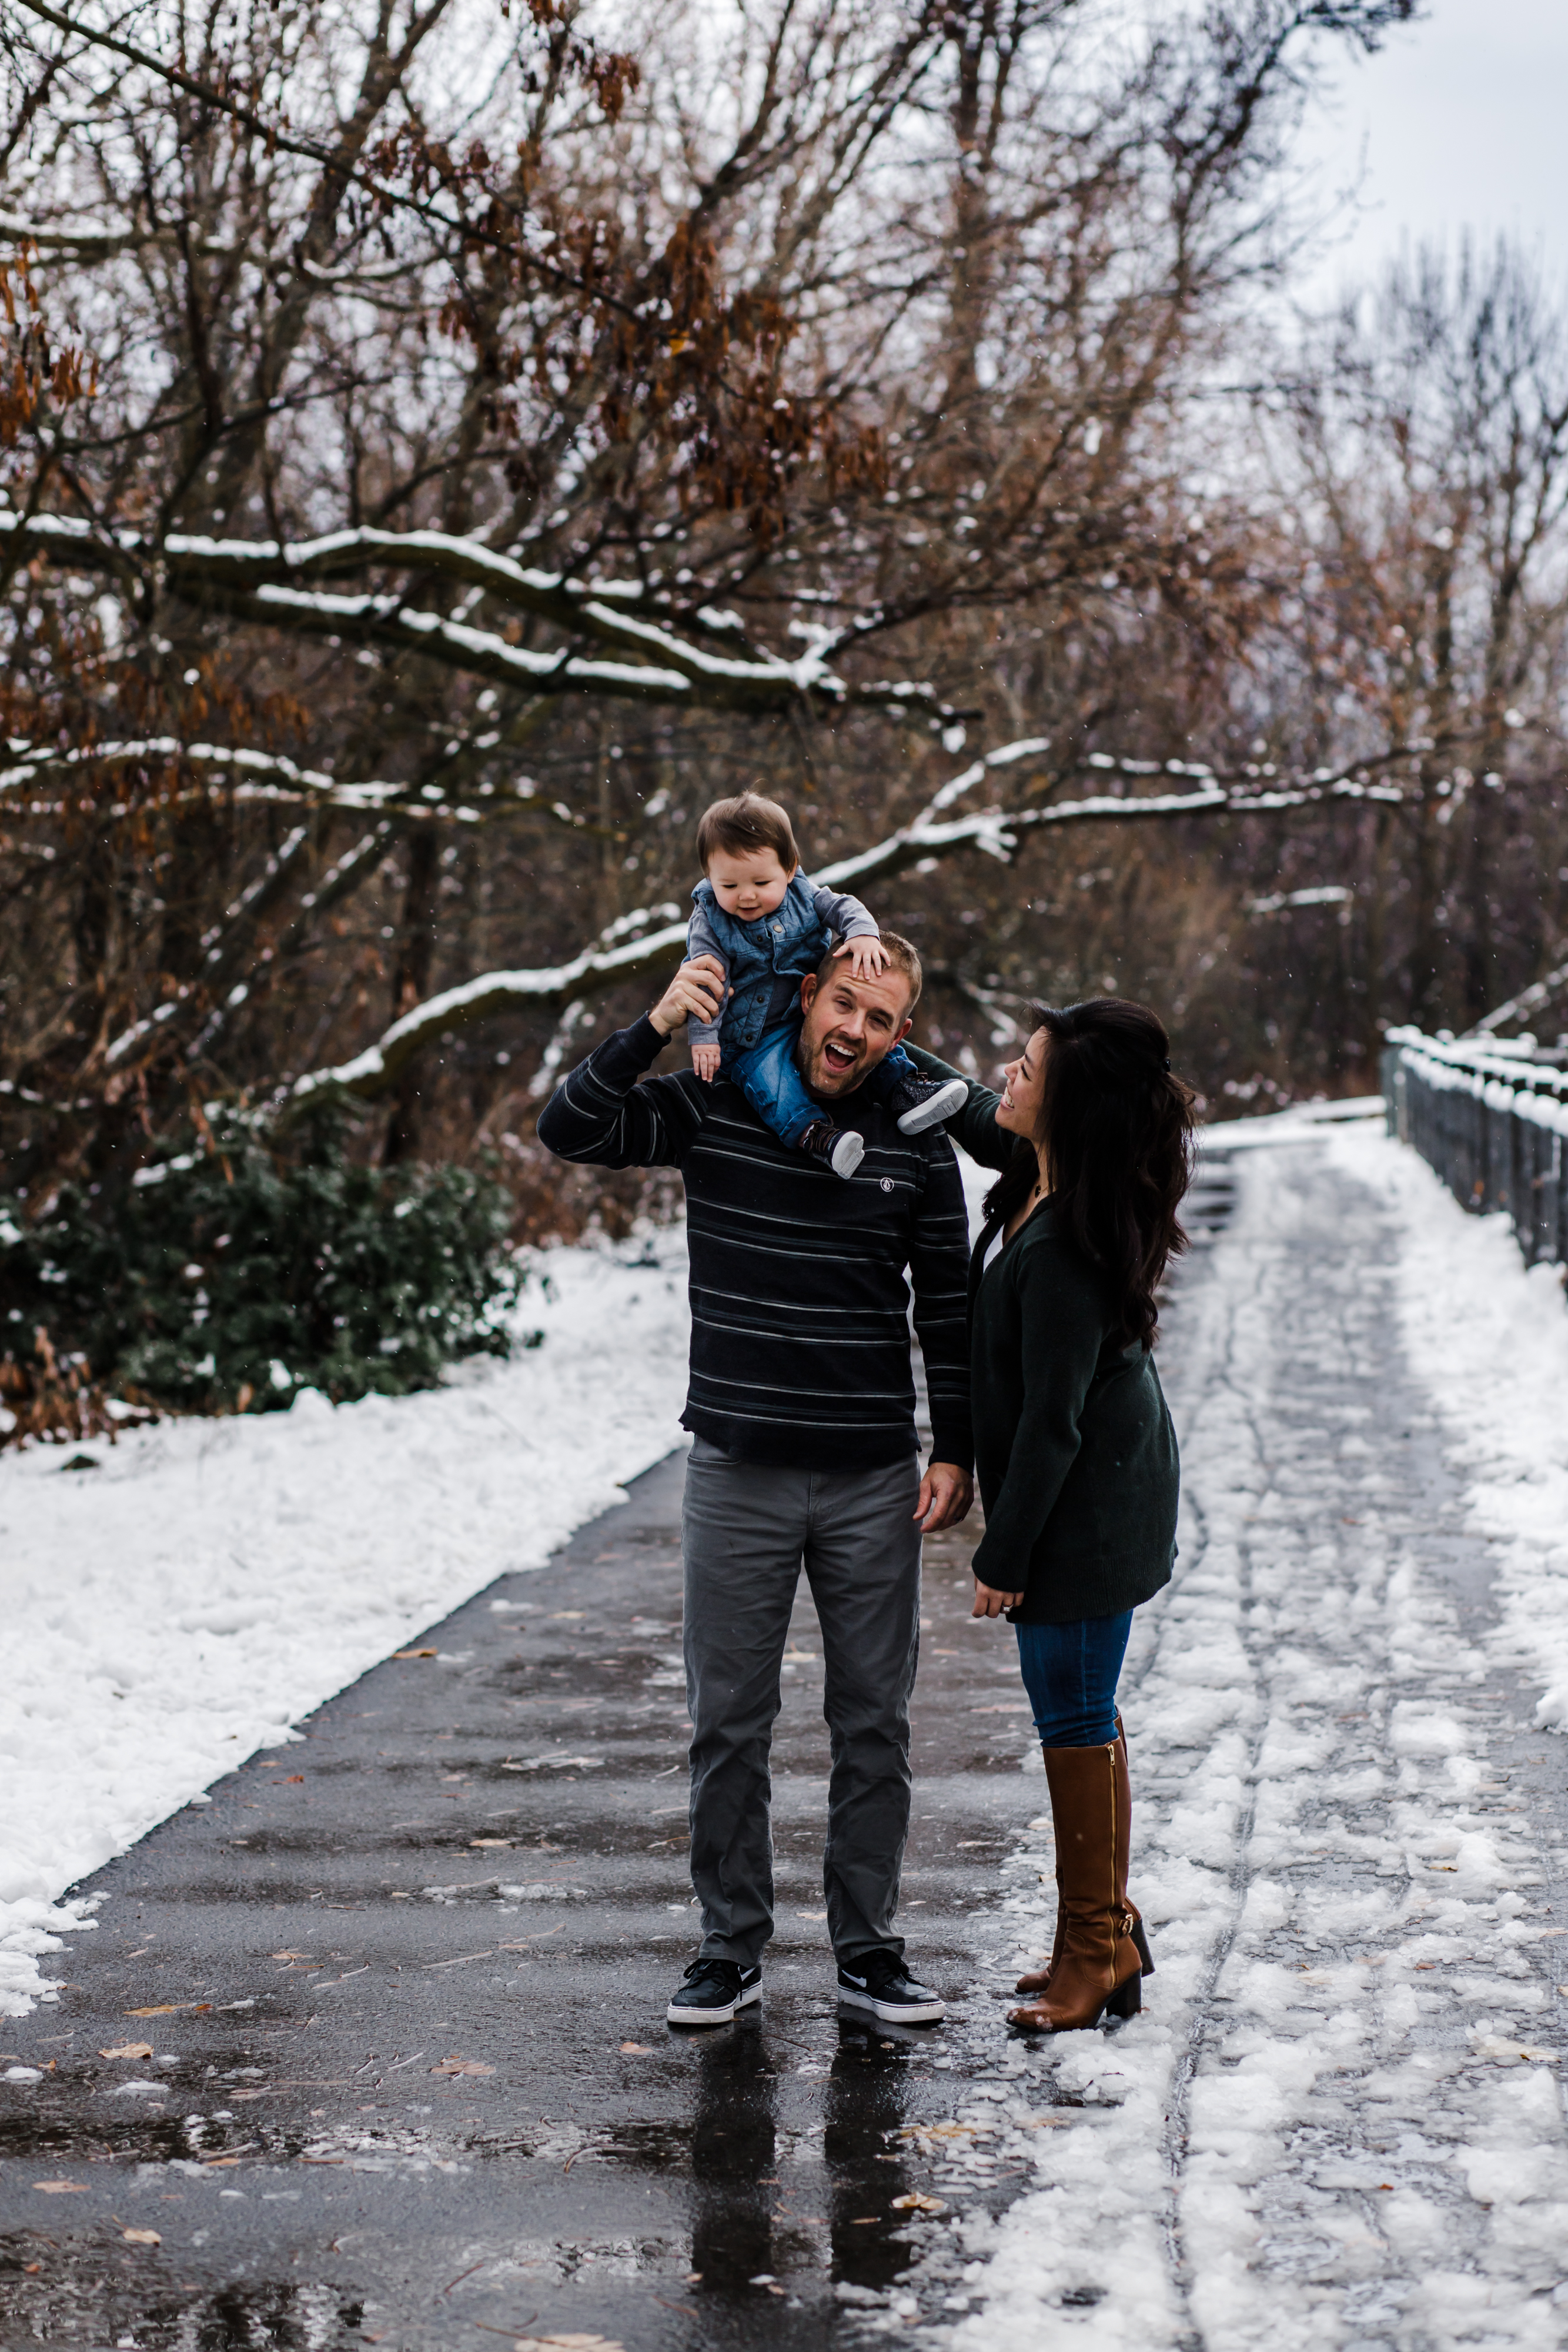 Snowy Family Session